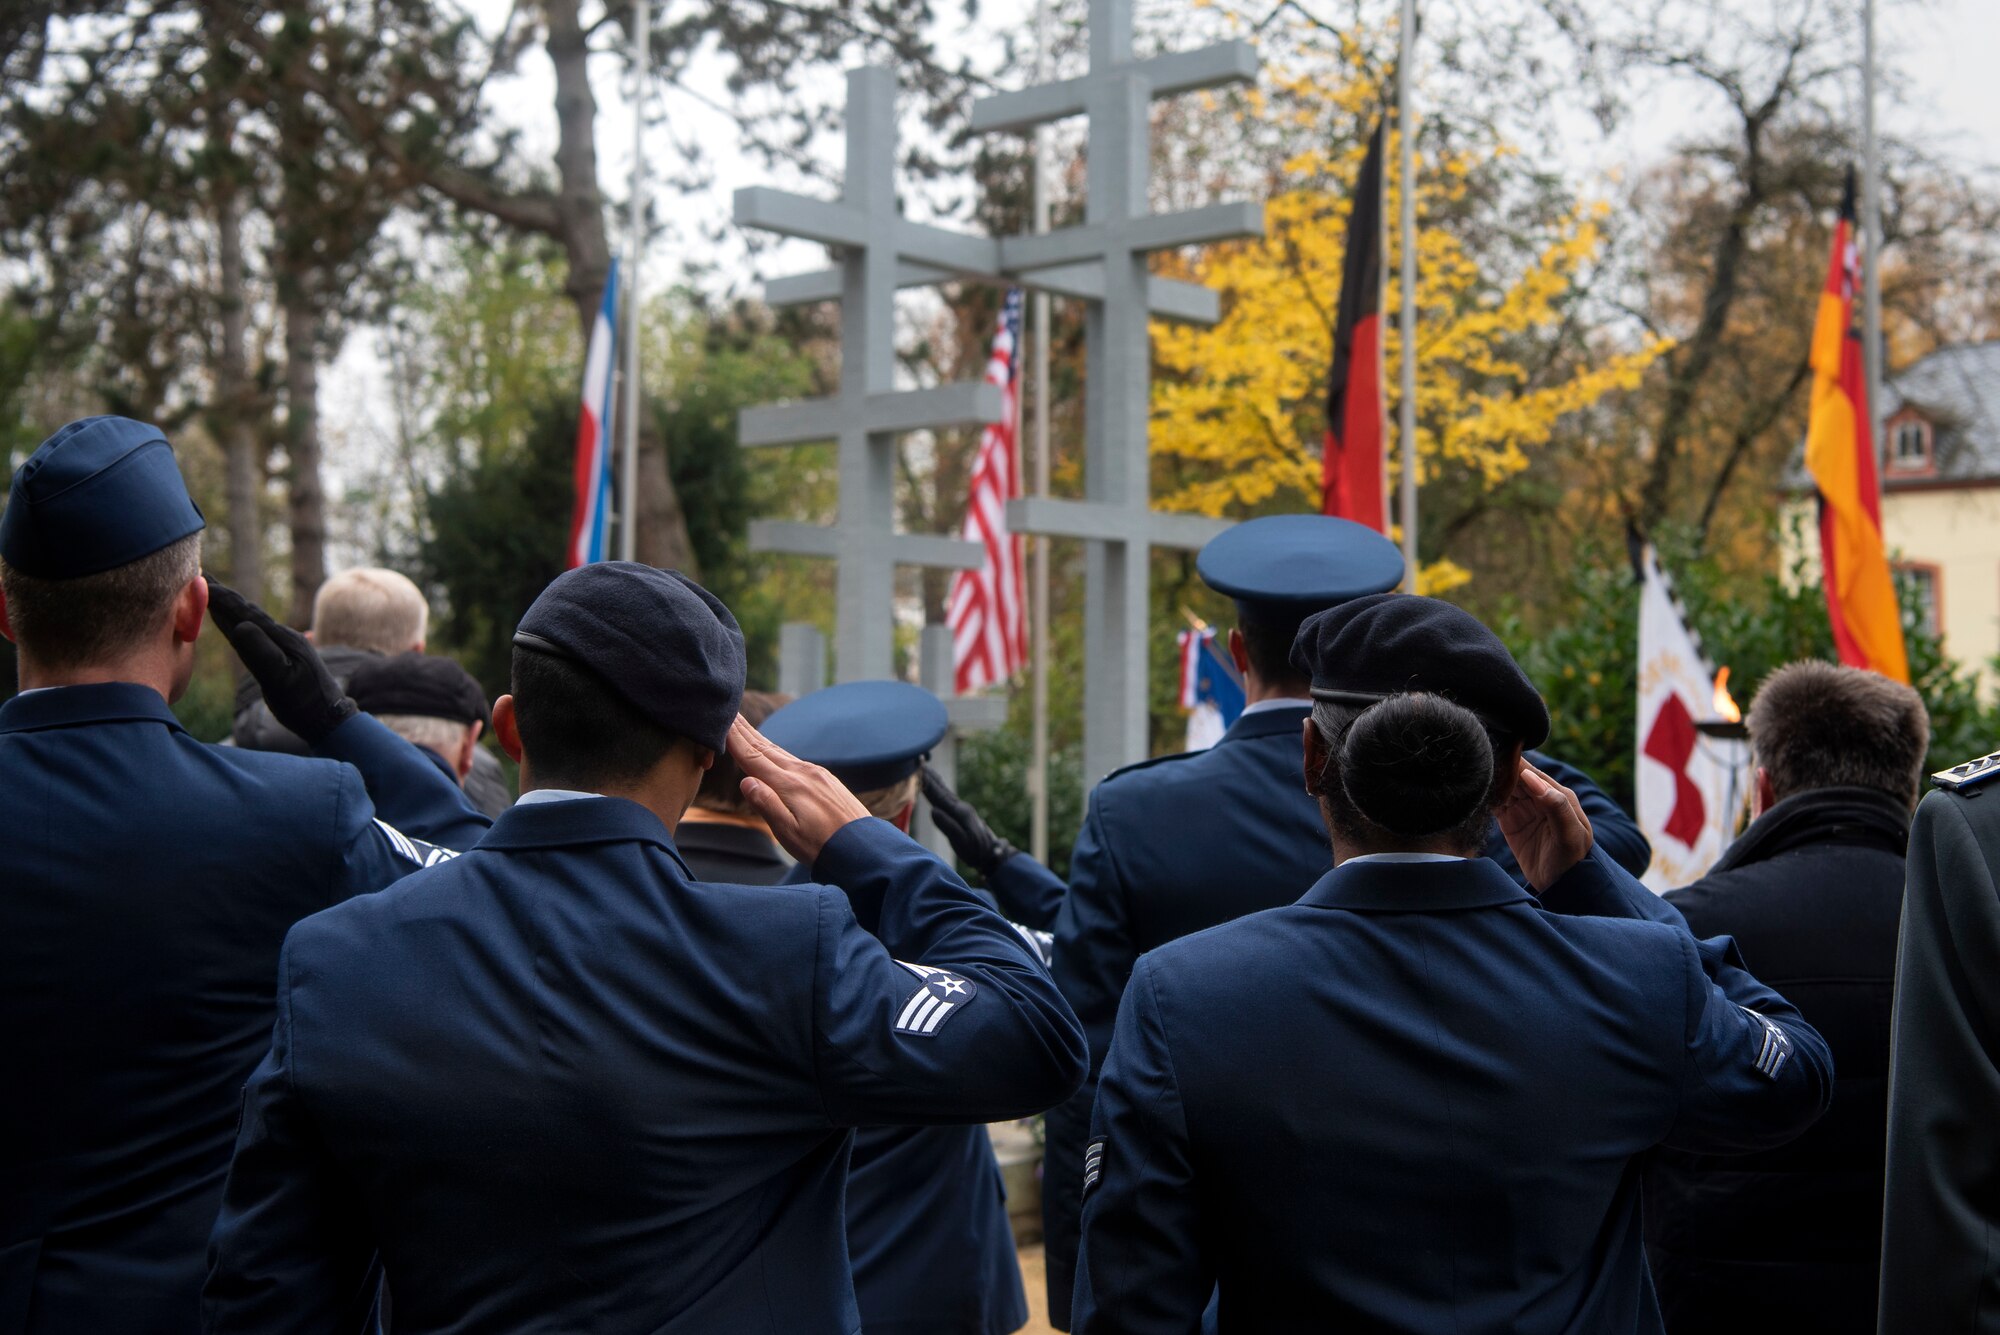 U.S. Air Force Airmen and leadership from the 52nd Fighter Wing render a salute during the German National Day of Mourning ceremony at the Trier cemetery in Trier, Germany, Nov. 17, 2019. A live band played the U.S. and German national anthems and attendees held a moment of silence. Germany established the annual observance at the conclusion of World War I, but the day now commemorates all those who have lost their lives in war. (U.S. Air Force photo by Airman 1st Class Valerie Seelye)